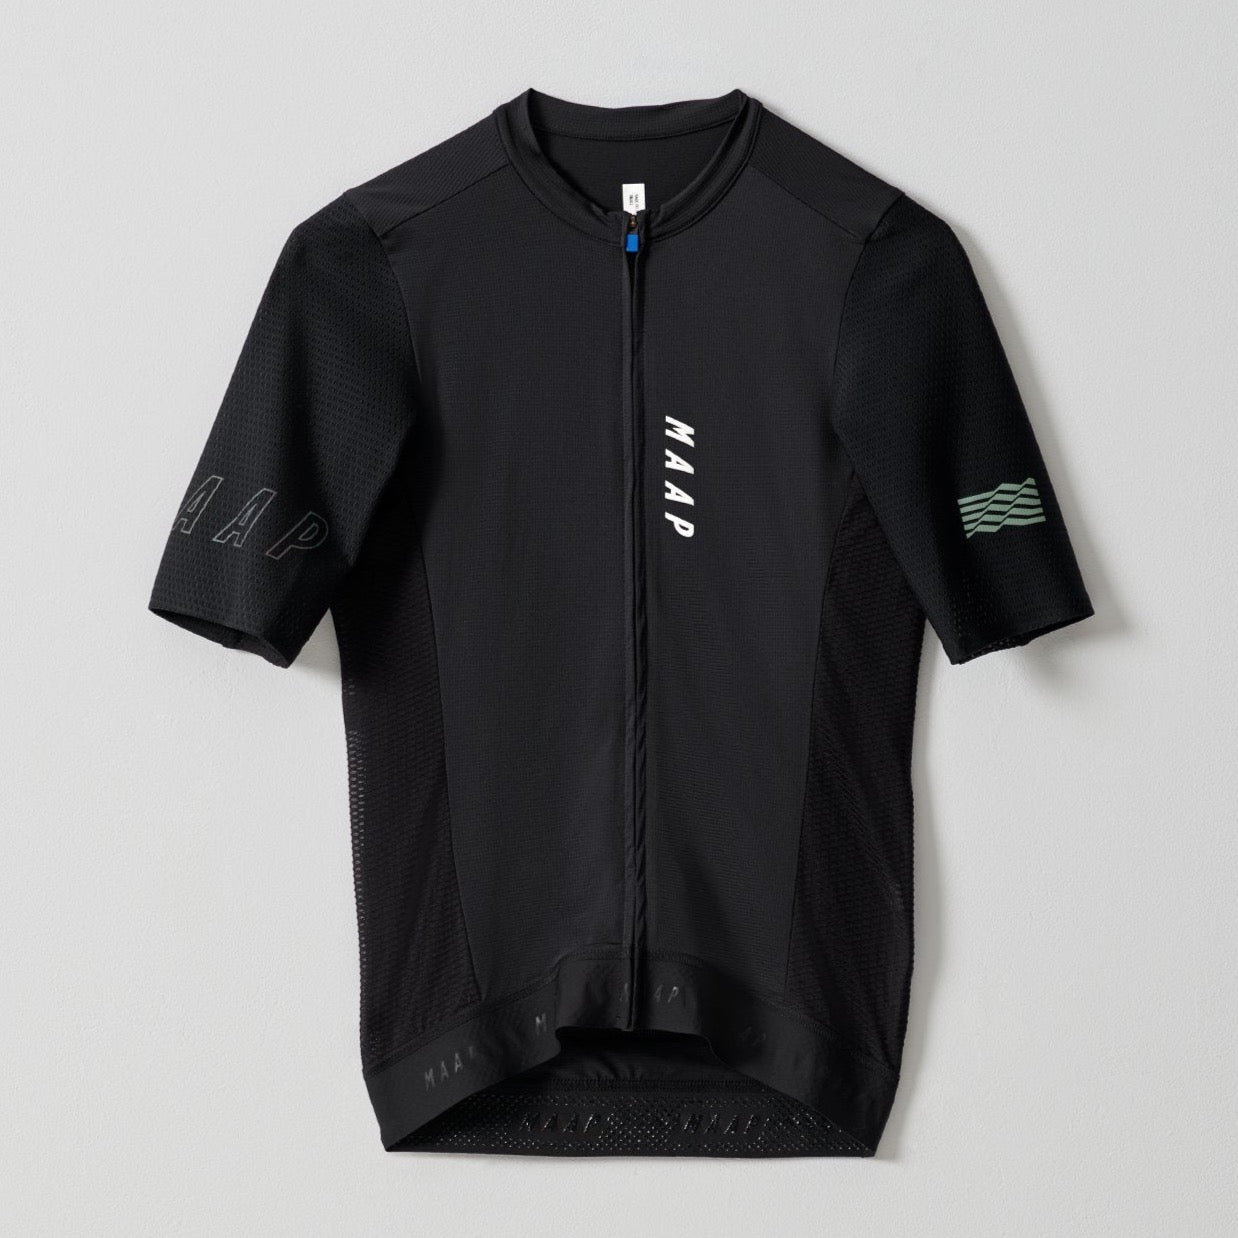 MAAP Men's Stealth Race Fit Jersey, 2021 - Cycle Closet